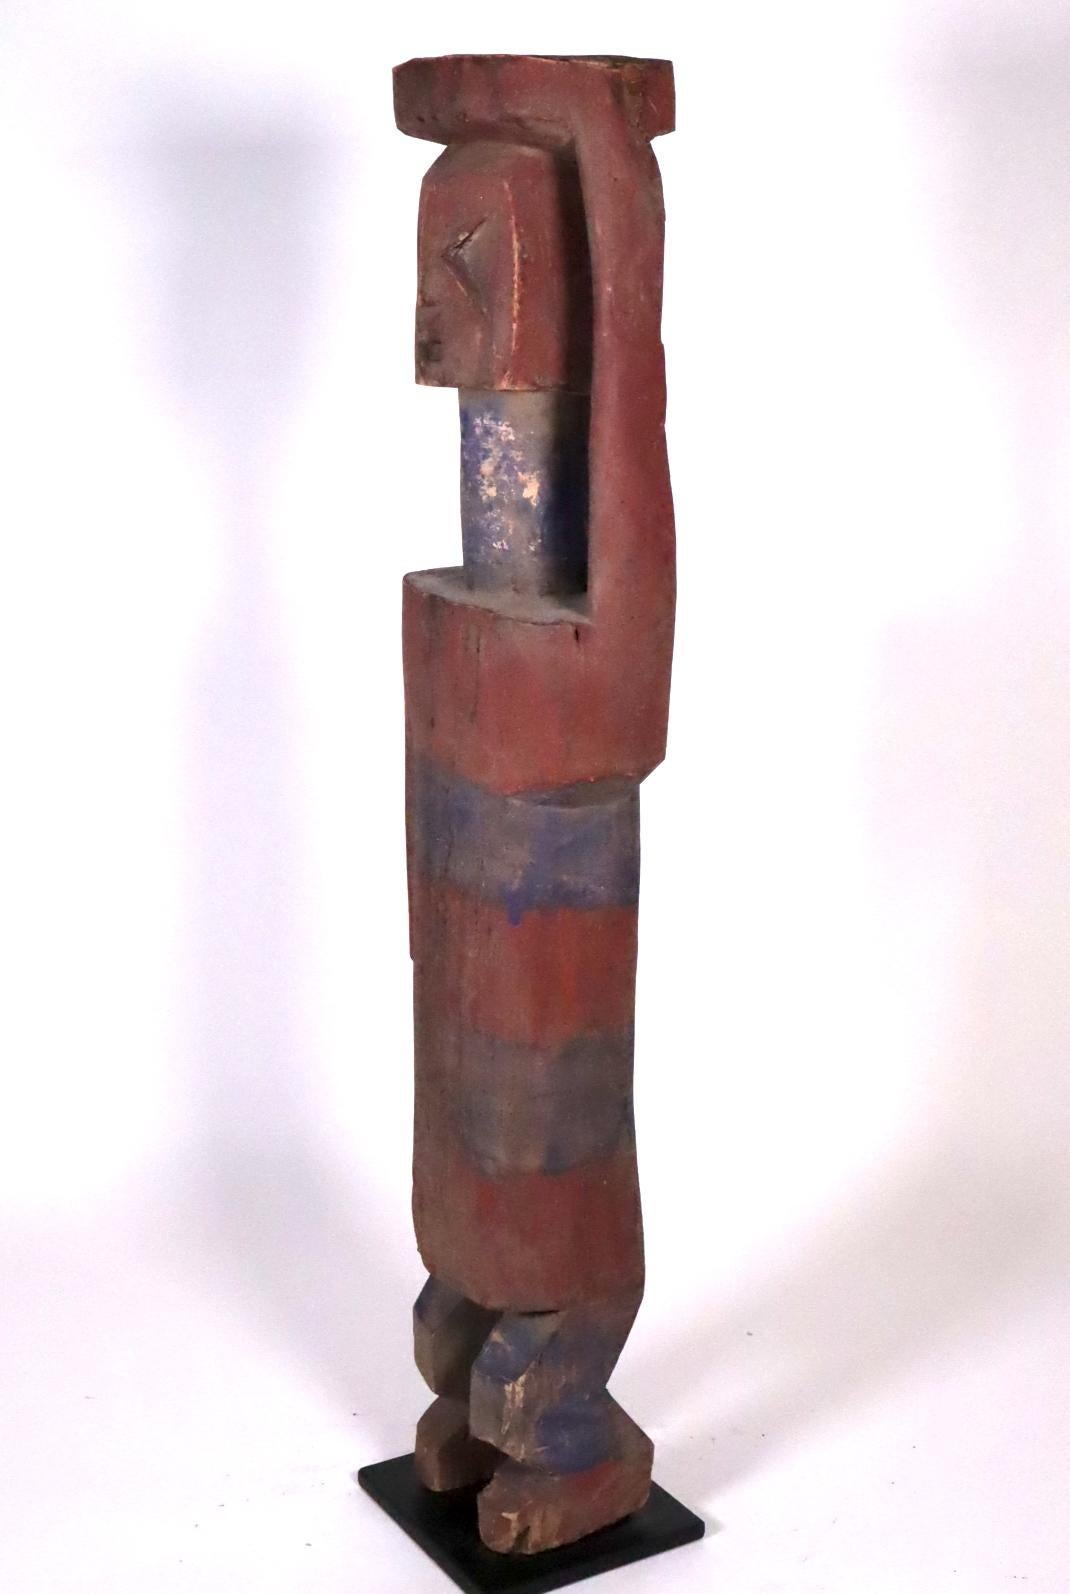 The largest Adan shrine figure we have ever seen at 27 1/2 inches high. Usually Adan figures are a third of this size or less. At this scale the sculptural skill of Adan artists is forcefully presented. The head is particularly interesting